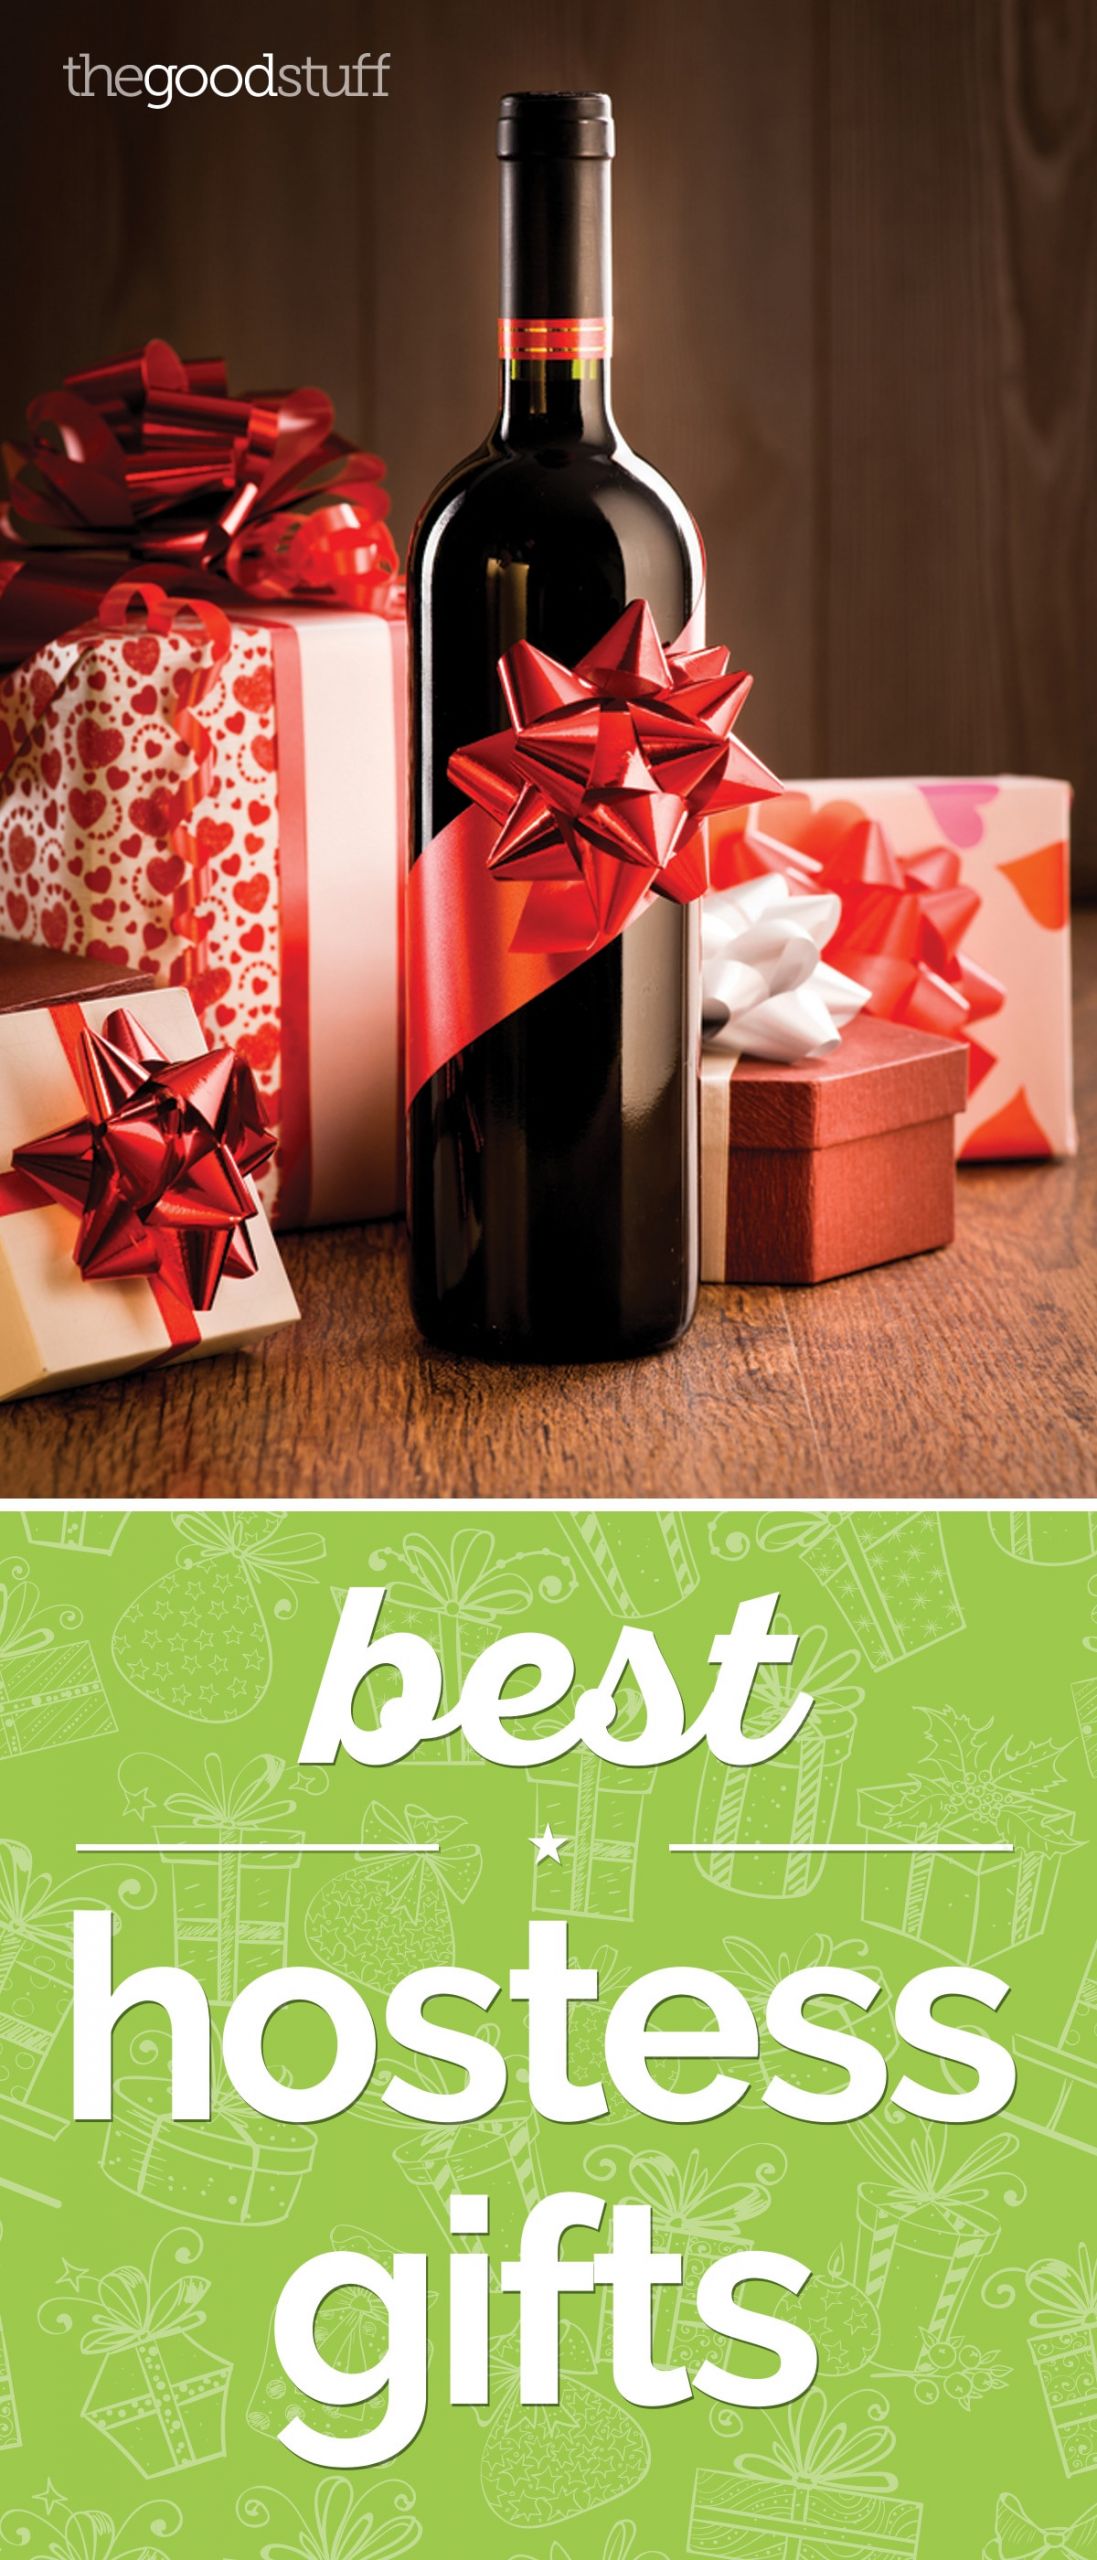 Holiday Hostess Gift Ideas
 Make Sure You re Invited Back Next Year Best Hostess